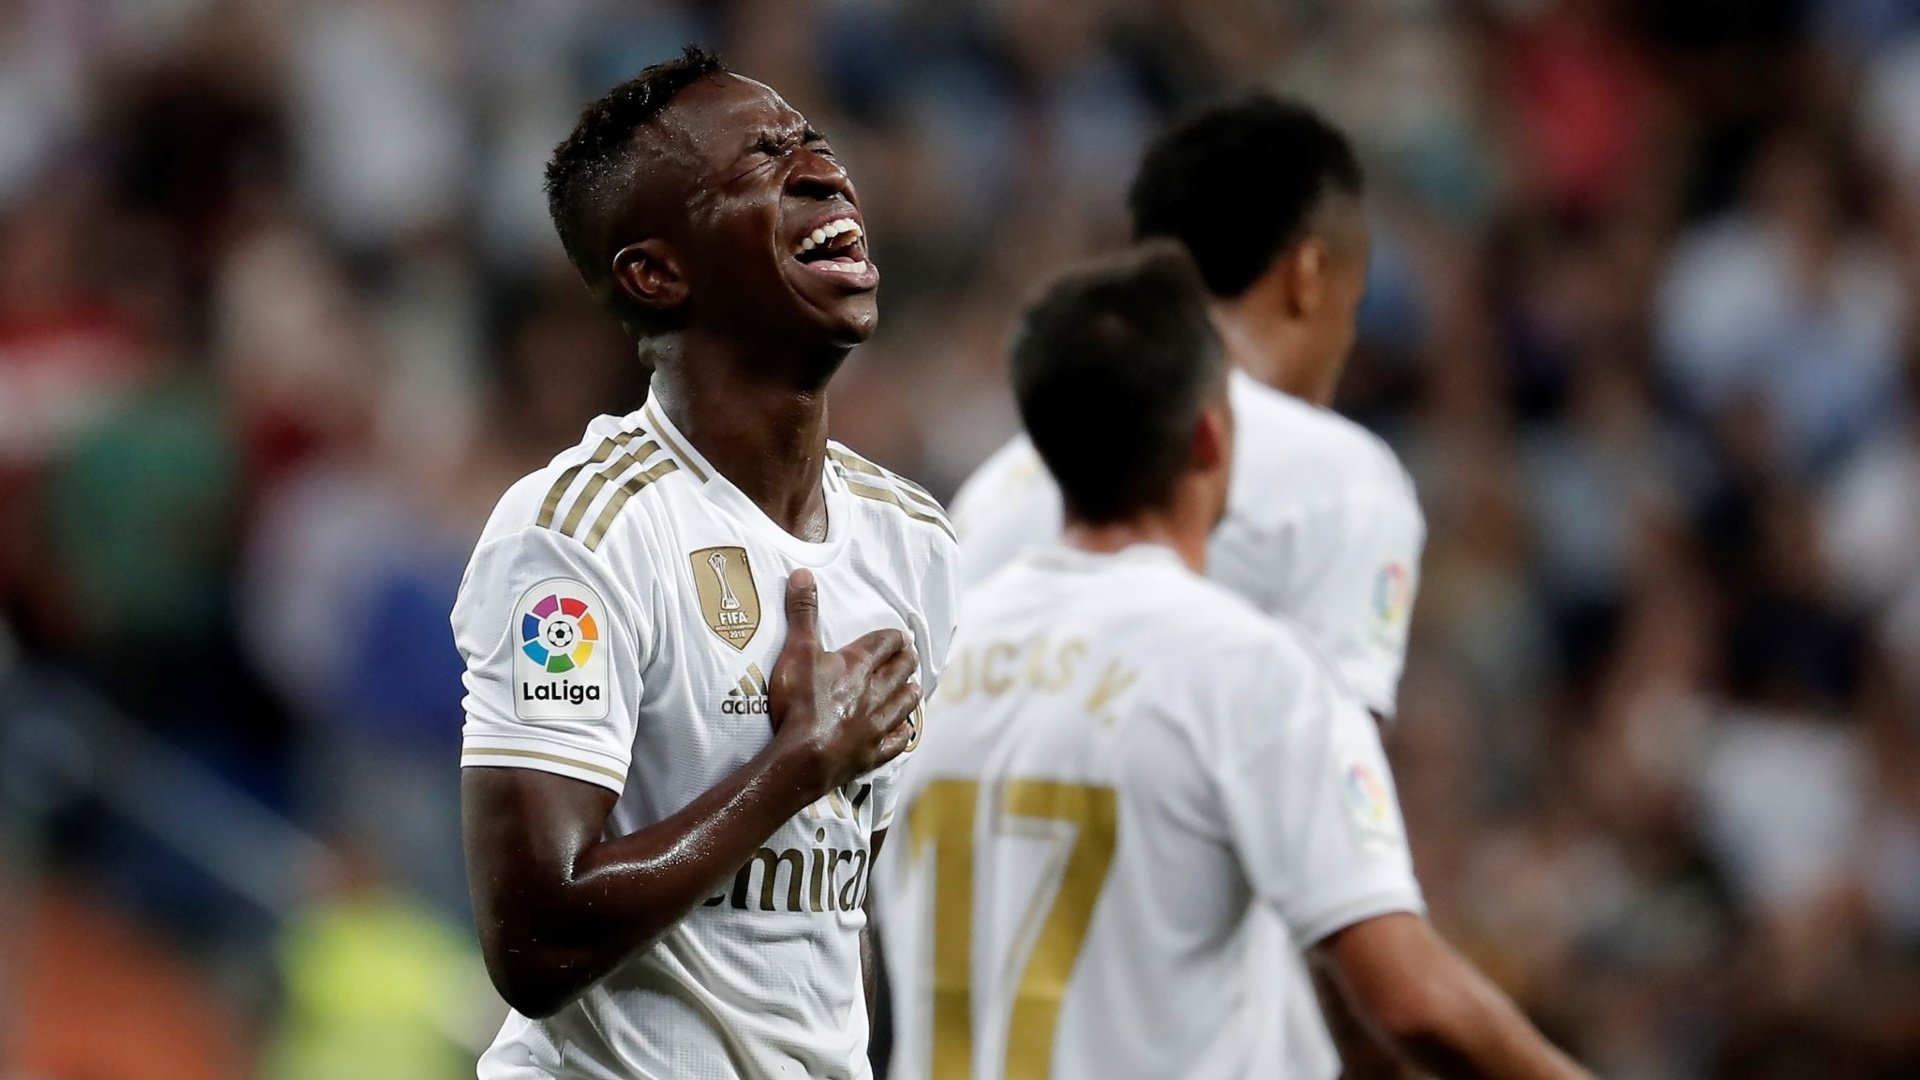 Vinicius Jr: I'm happy and the goal is a massive weight off my shoulders